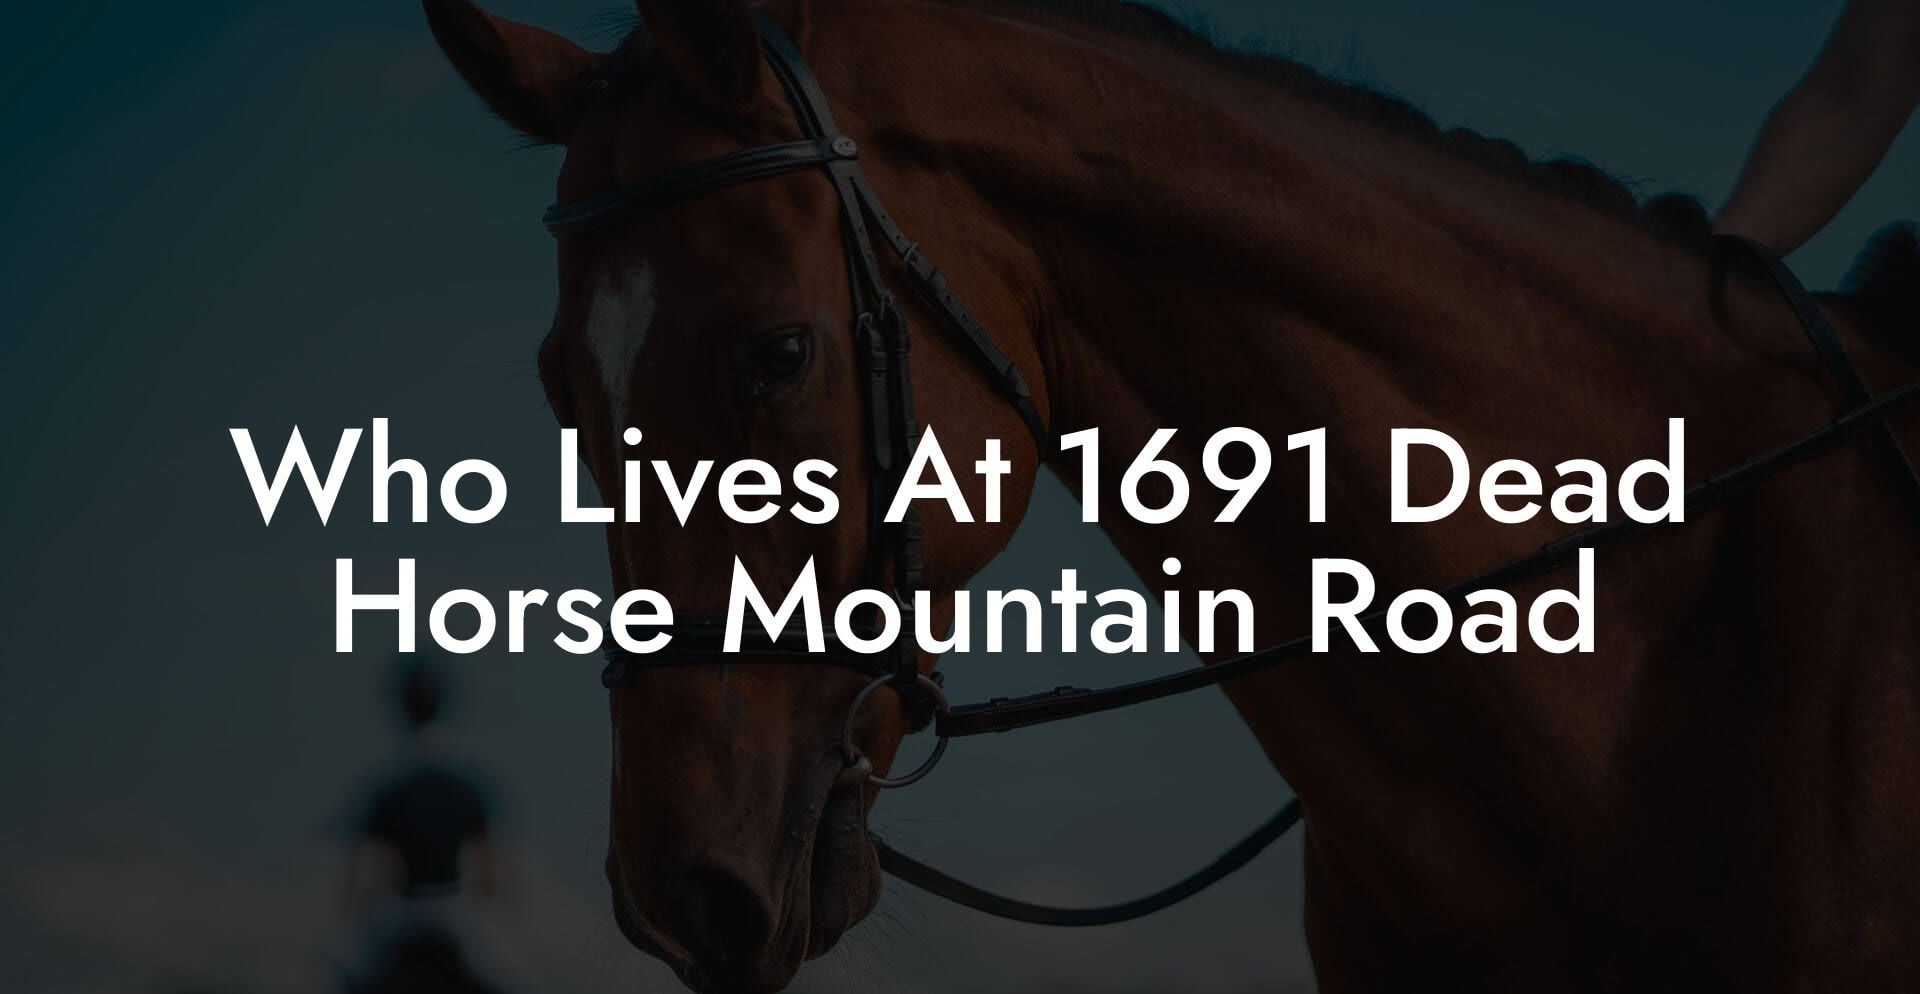 Who Lives At 1691 Dead Horse Mountain Road